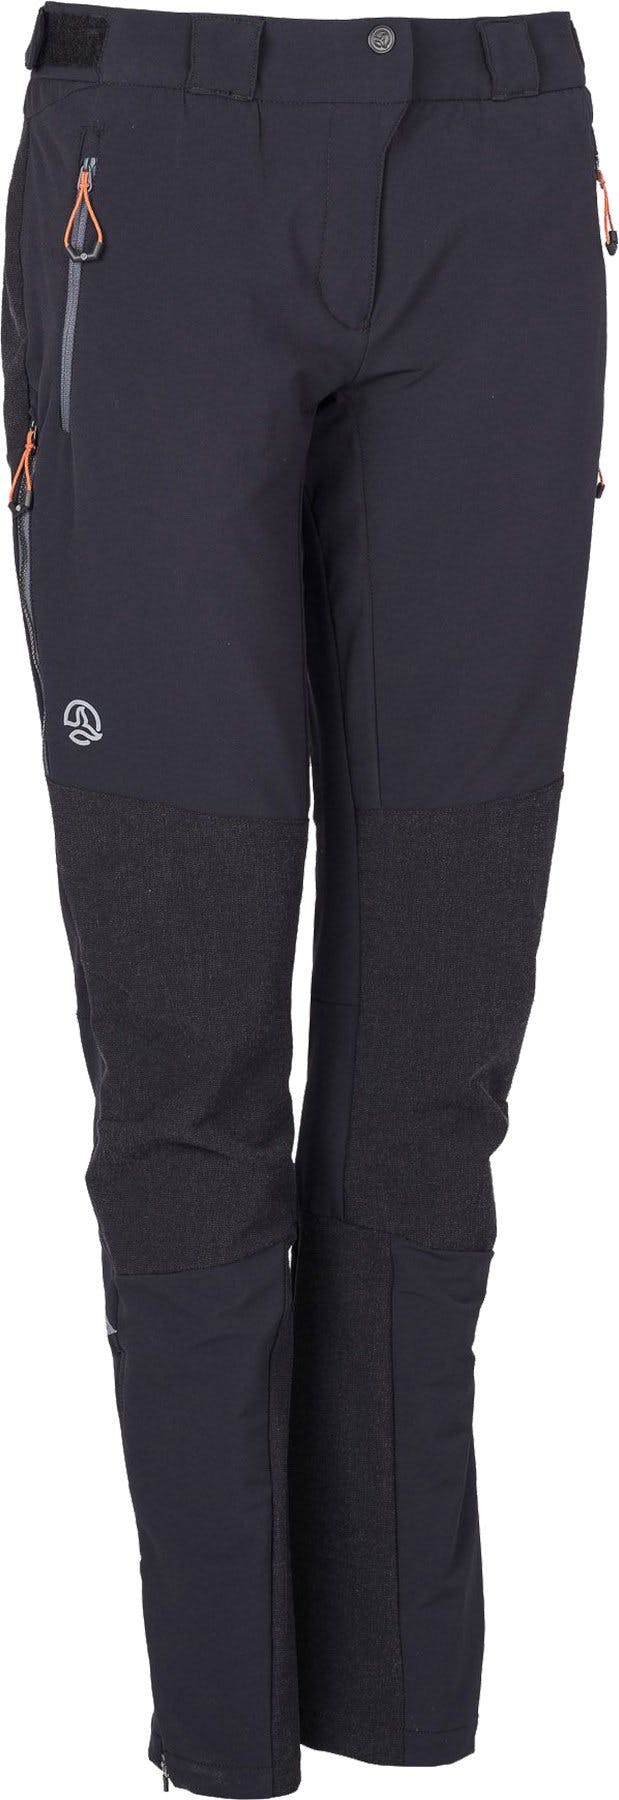 Product image for Elbrus PT Trousers - Women's